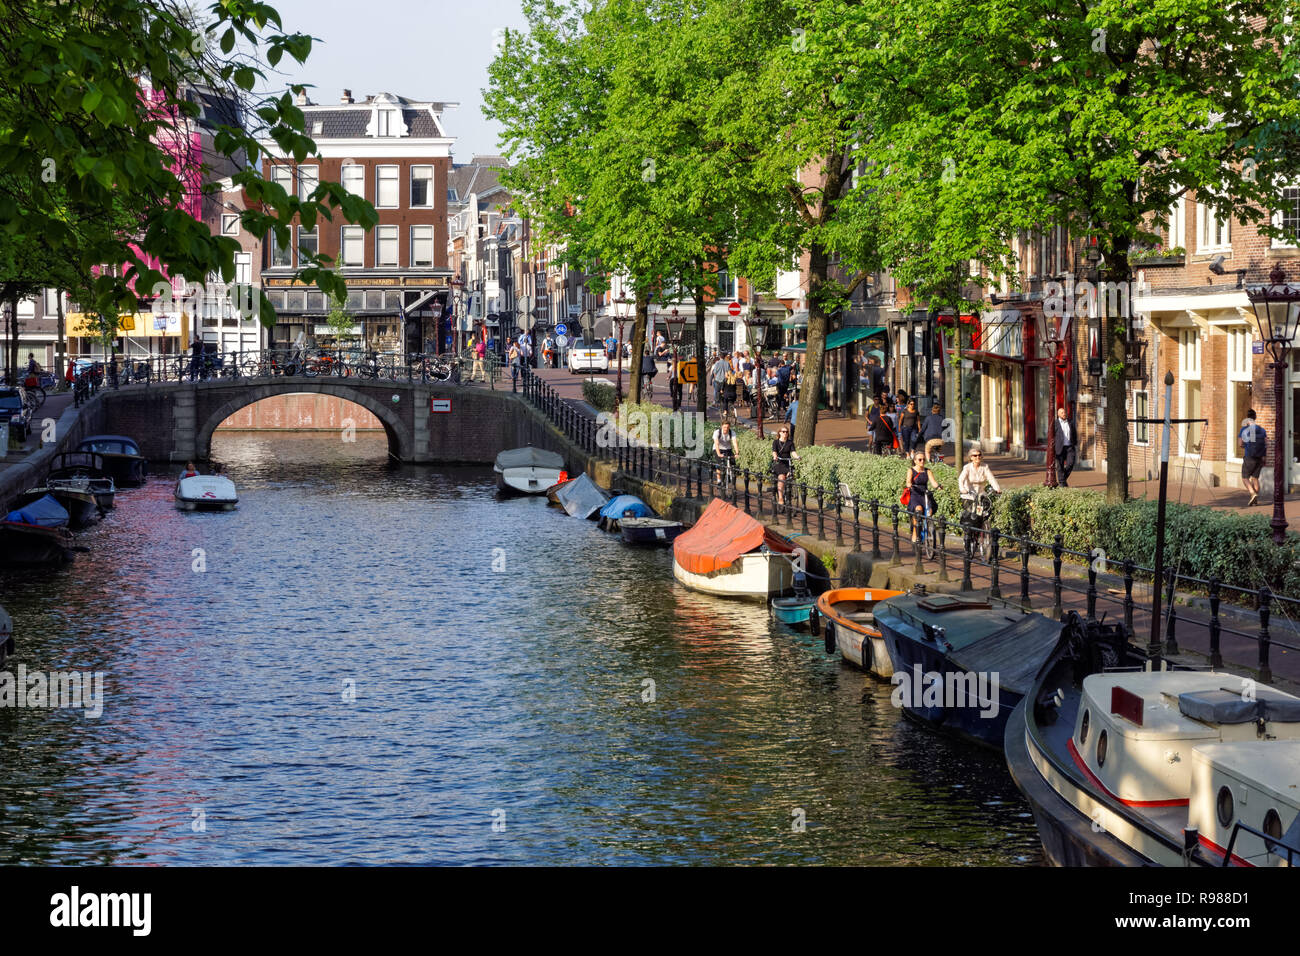 People cycling along Spiegelgracht canal in Amsterdam, Netherlands Stock Photo